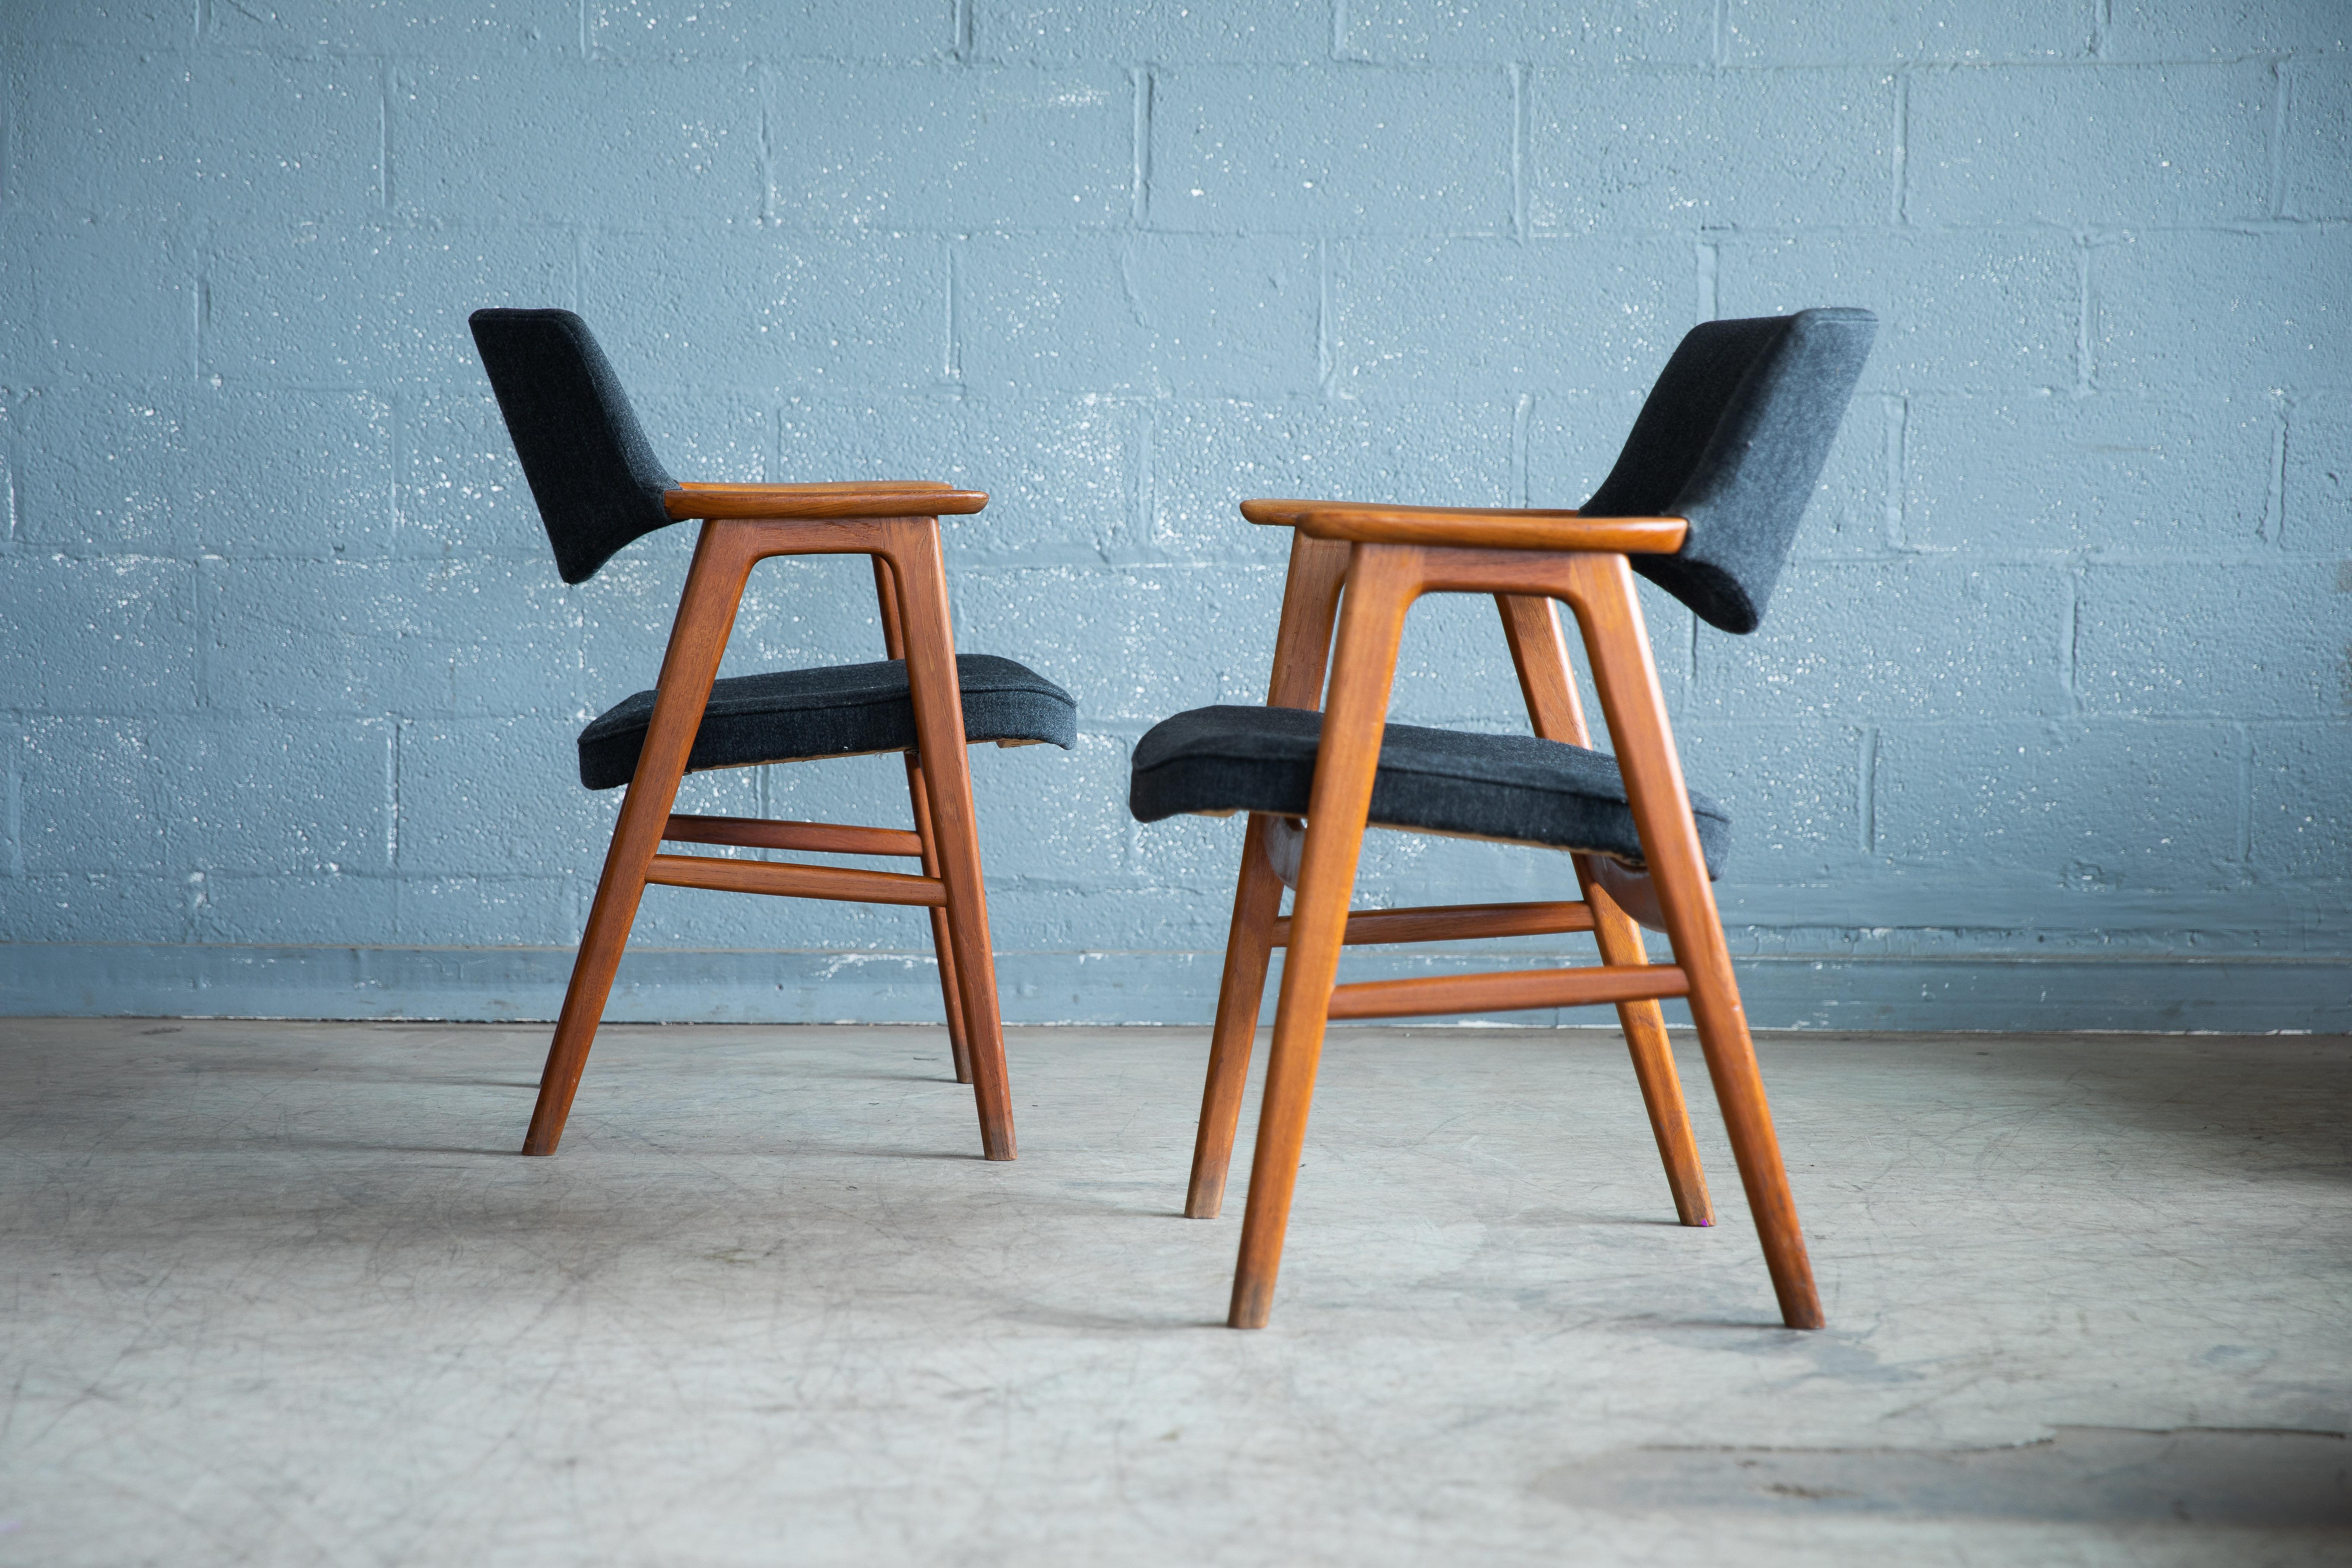 Fantastic pair set of two armchairs or desk chairs designed by Erik Kirkegaard in the 1950 for Høng Stolefabrik in Denmark. Very sought after and increasingly rare to find perfect accent chairs or desk chairs for any modern home. Made of solid teak.